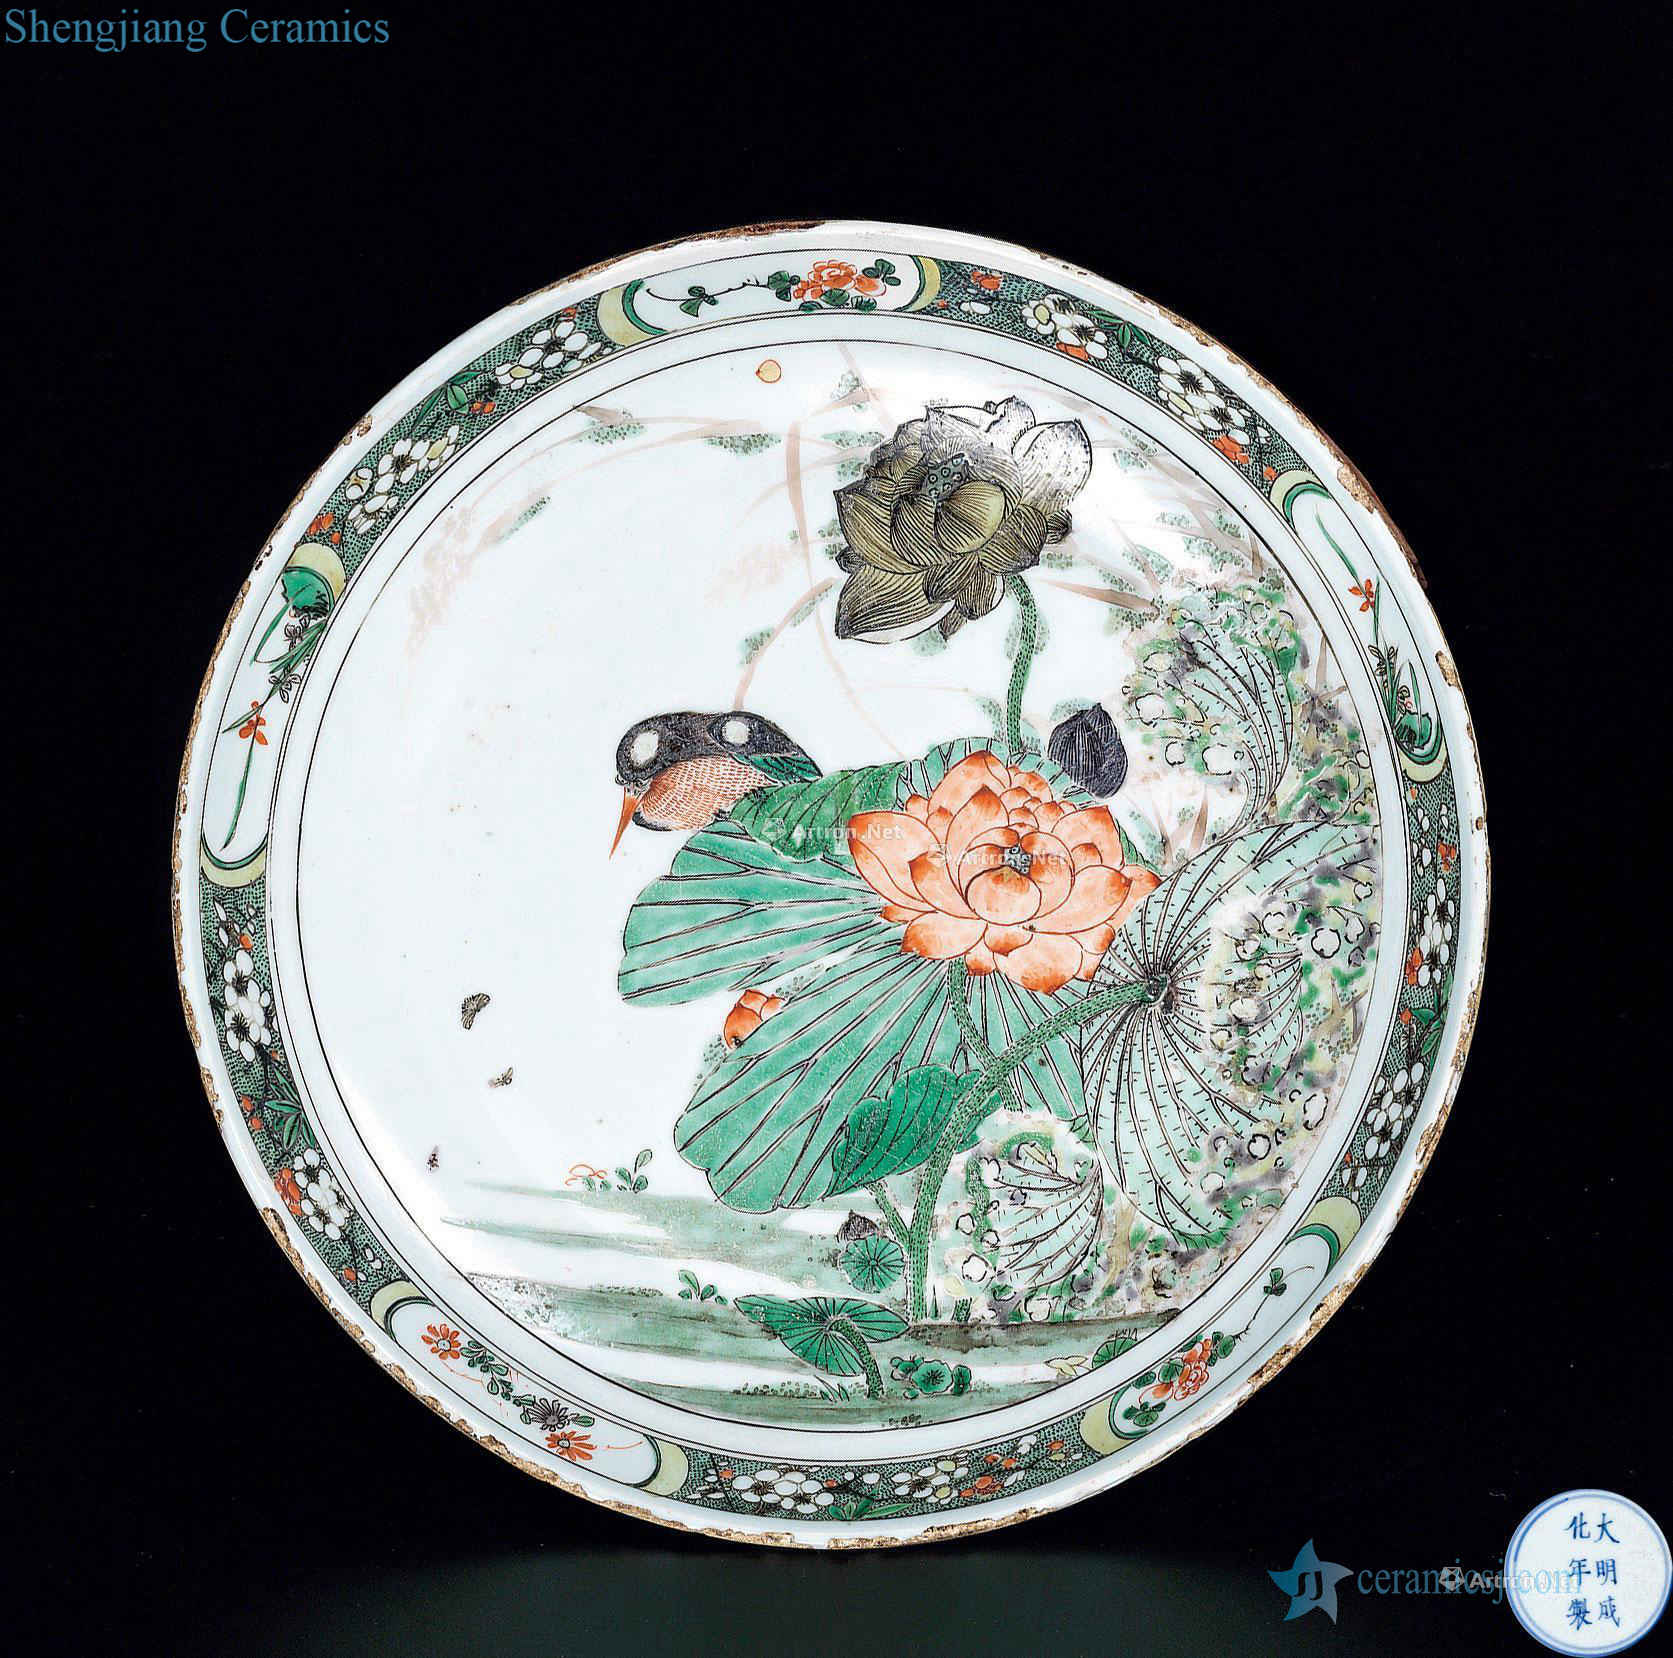 The qing emperor kangxi medallion flower-and-bird tray